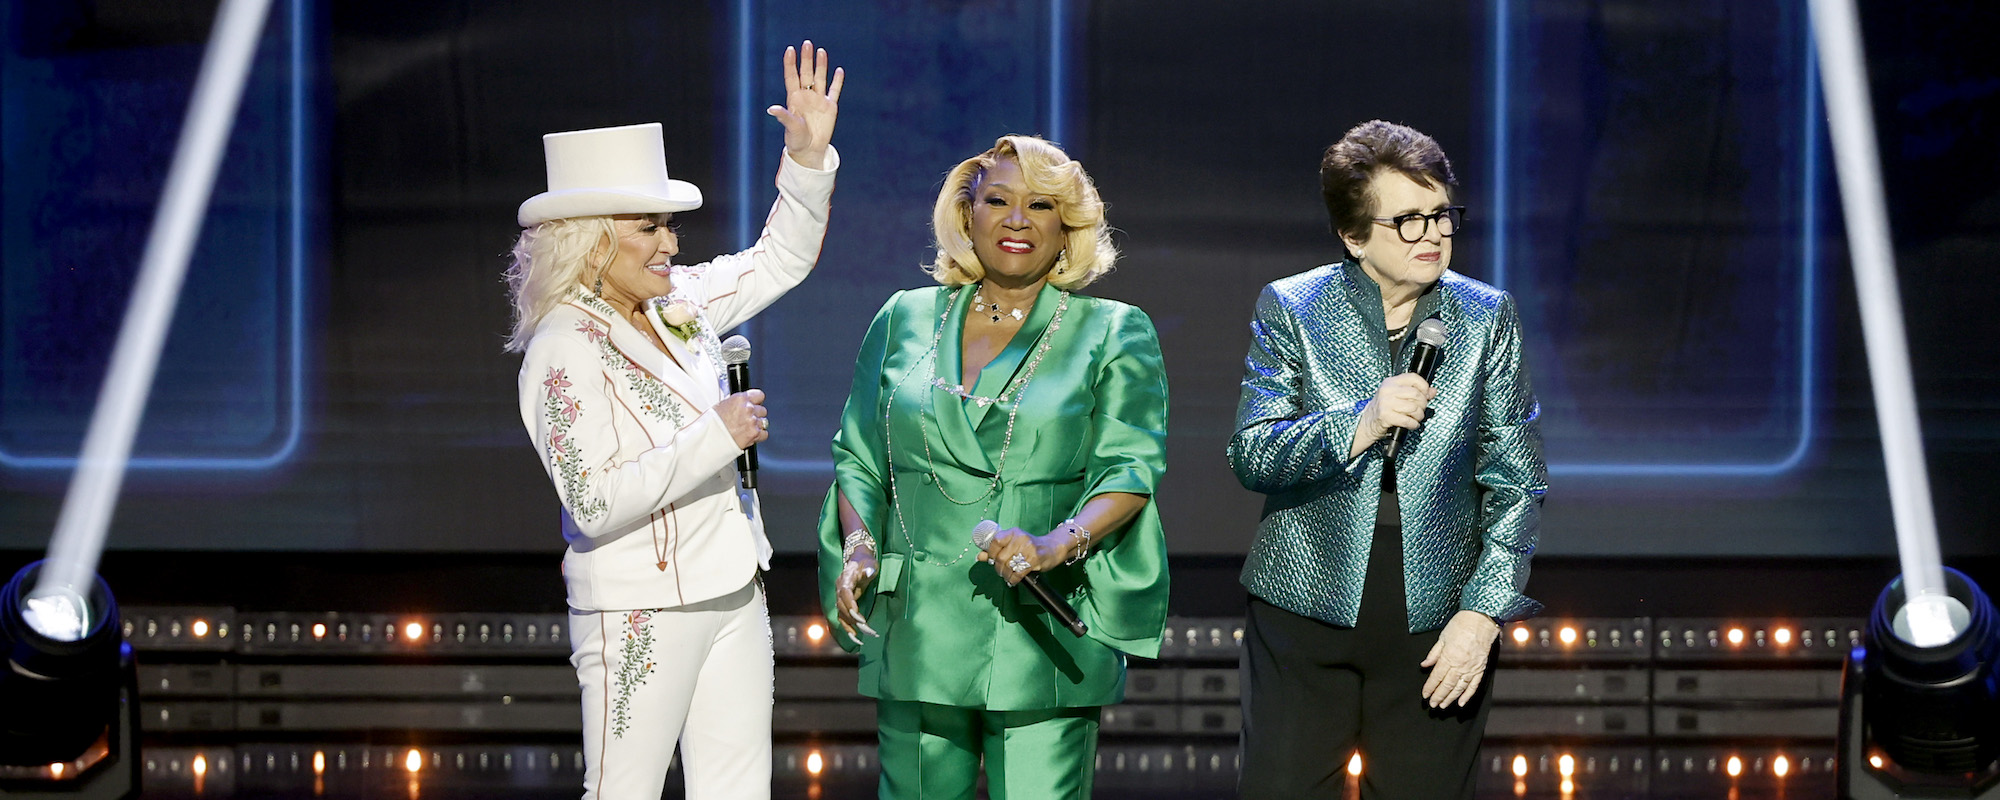 CMT’s ‘Smashing Glass’ Honors Tanya Tucker, Patti LaBelle, and More Groundbreaking Women In Music